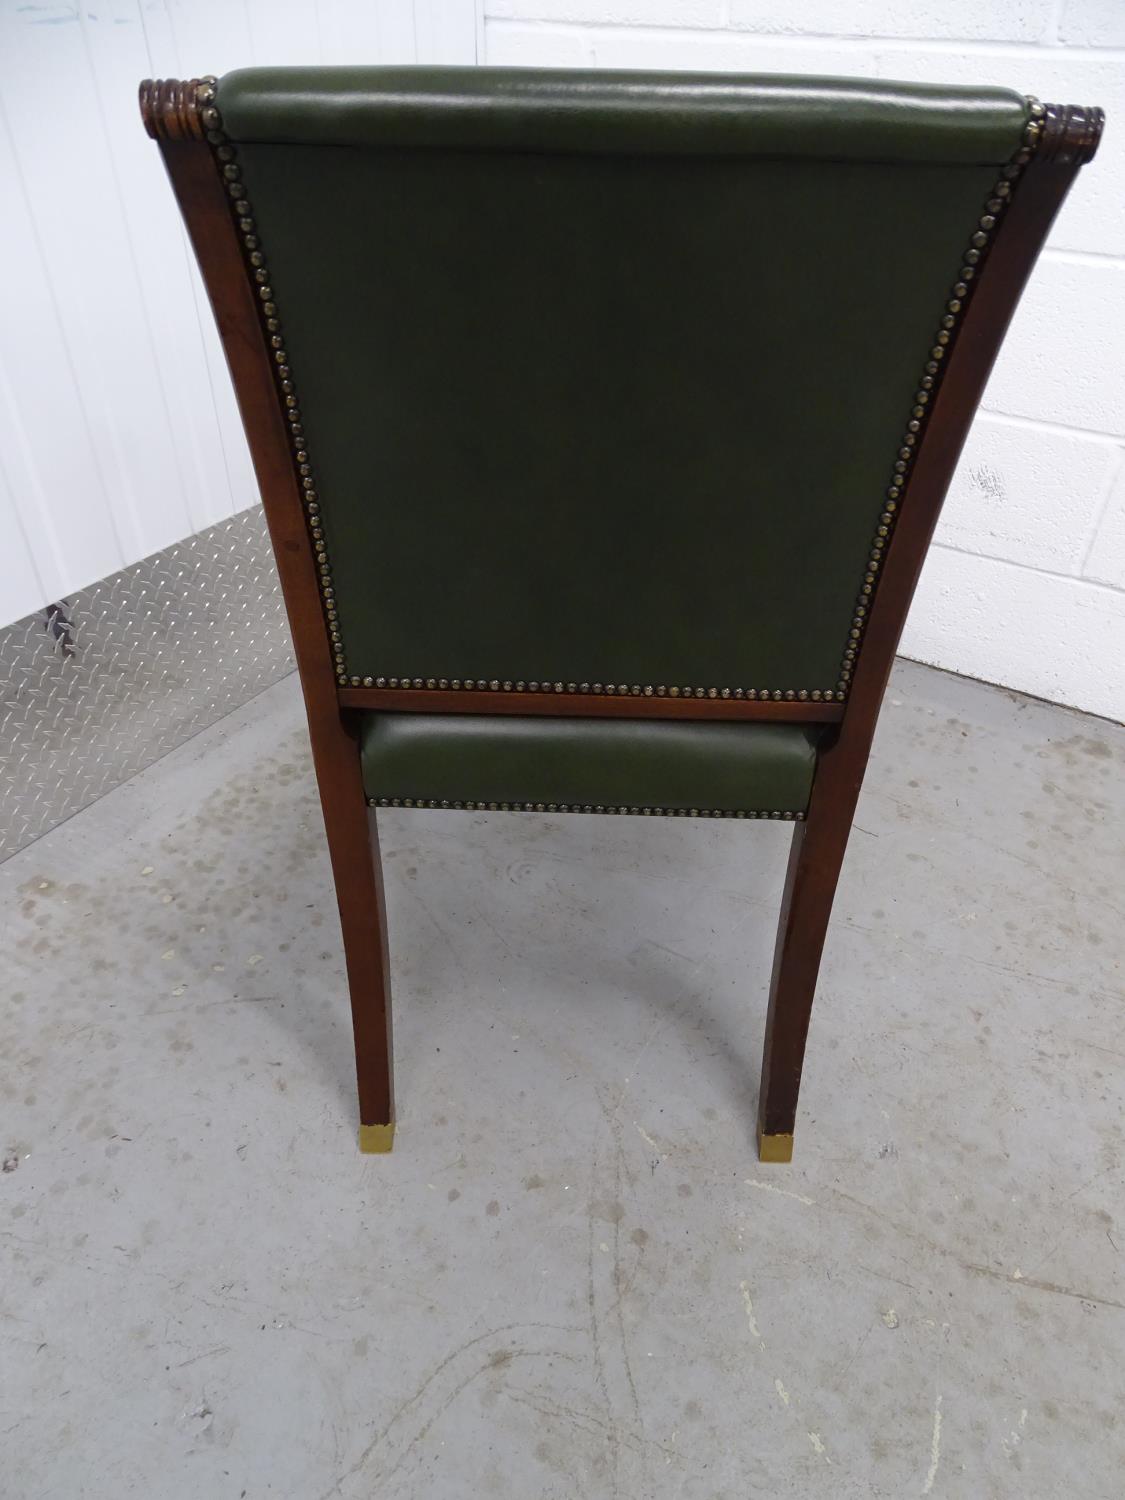 Leather open arm chair - a green leather over stuffed chair, with scroll ended arms, brass capped - Image 4 of 6